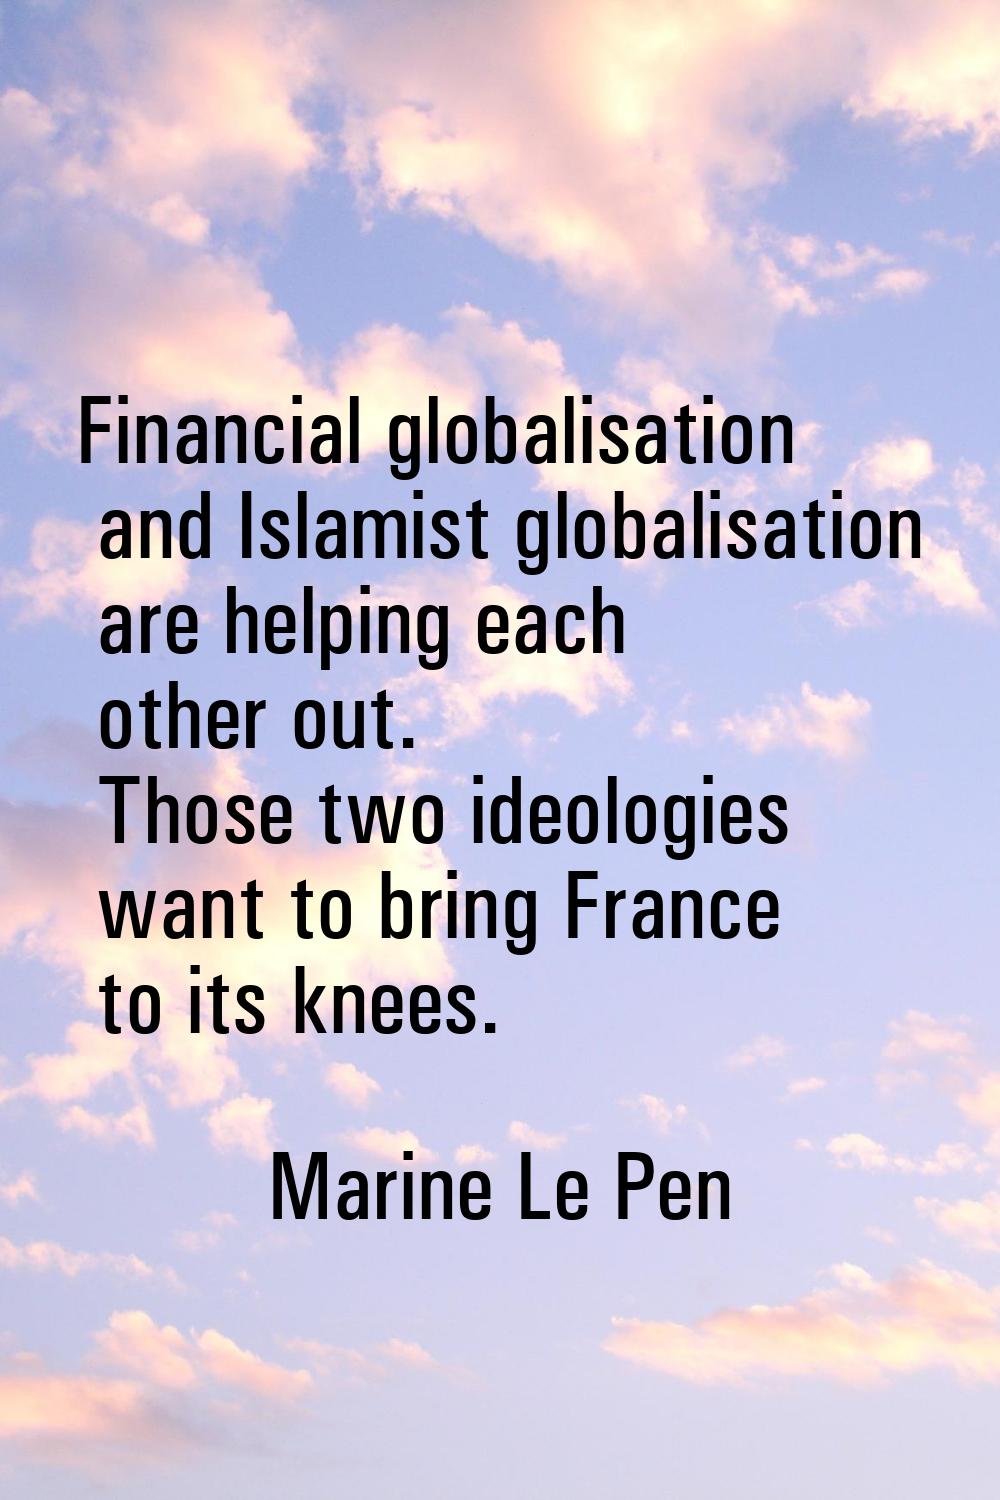 Financial globalisation and Islamist globalisation are helping each other out. Those two ideologies